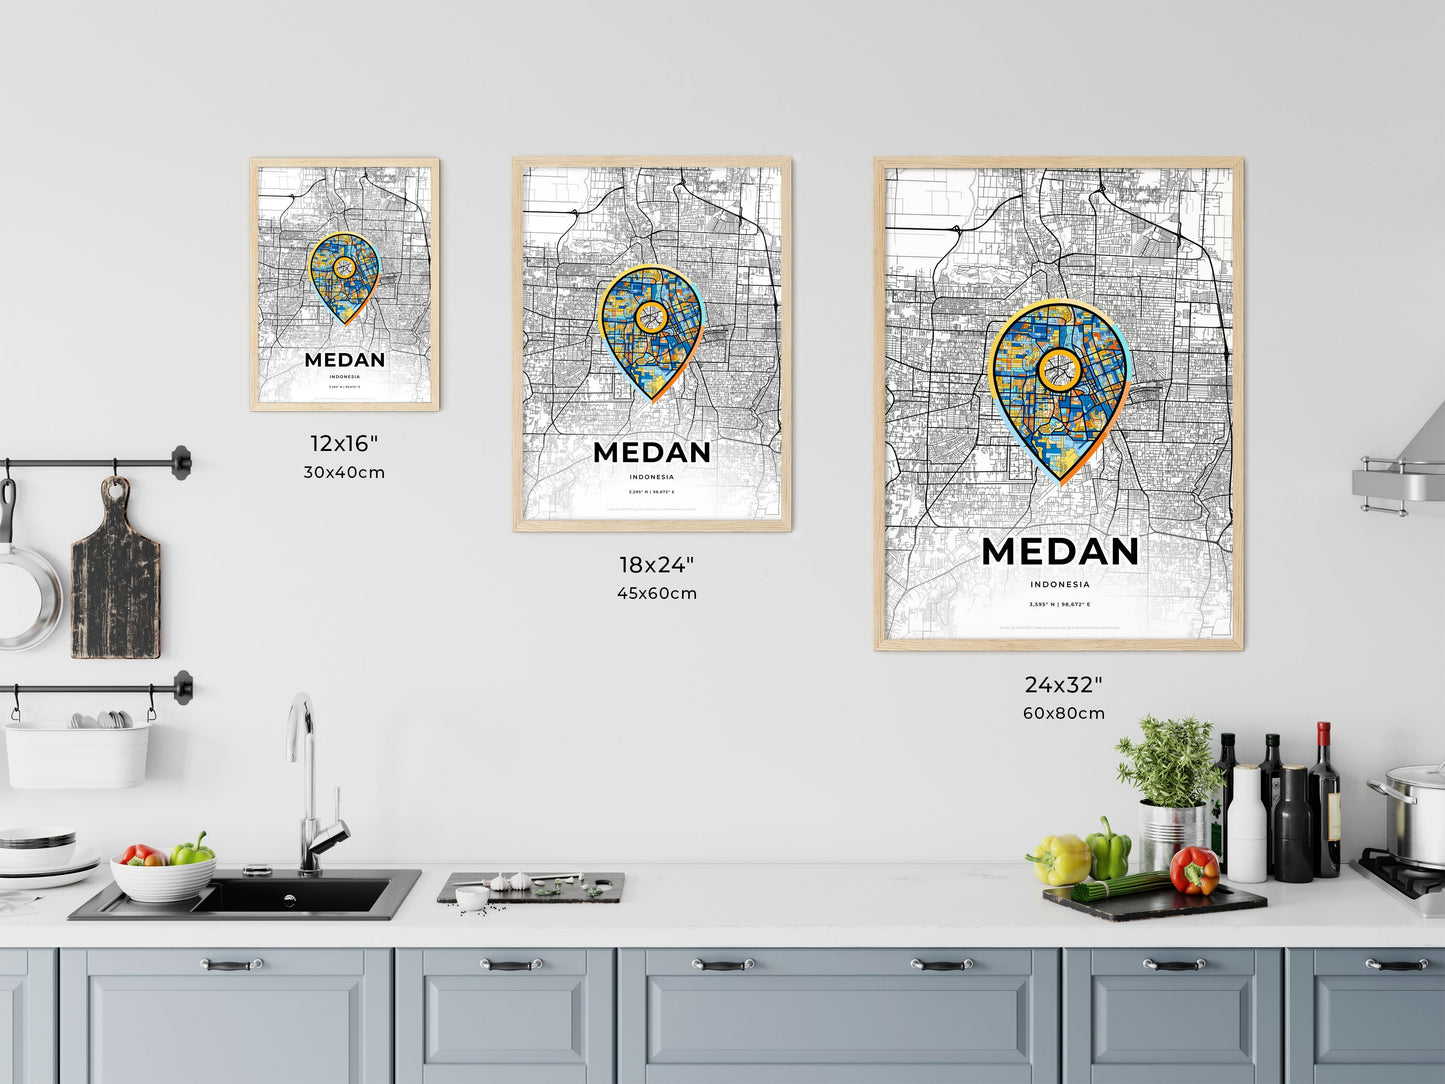 MEDAN INDONESIA minimal art map with a colorful icon. Where it all began, Couple map gift.